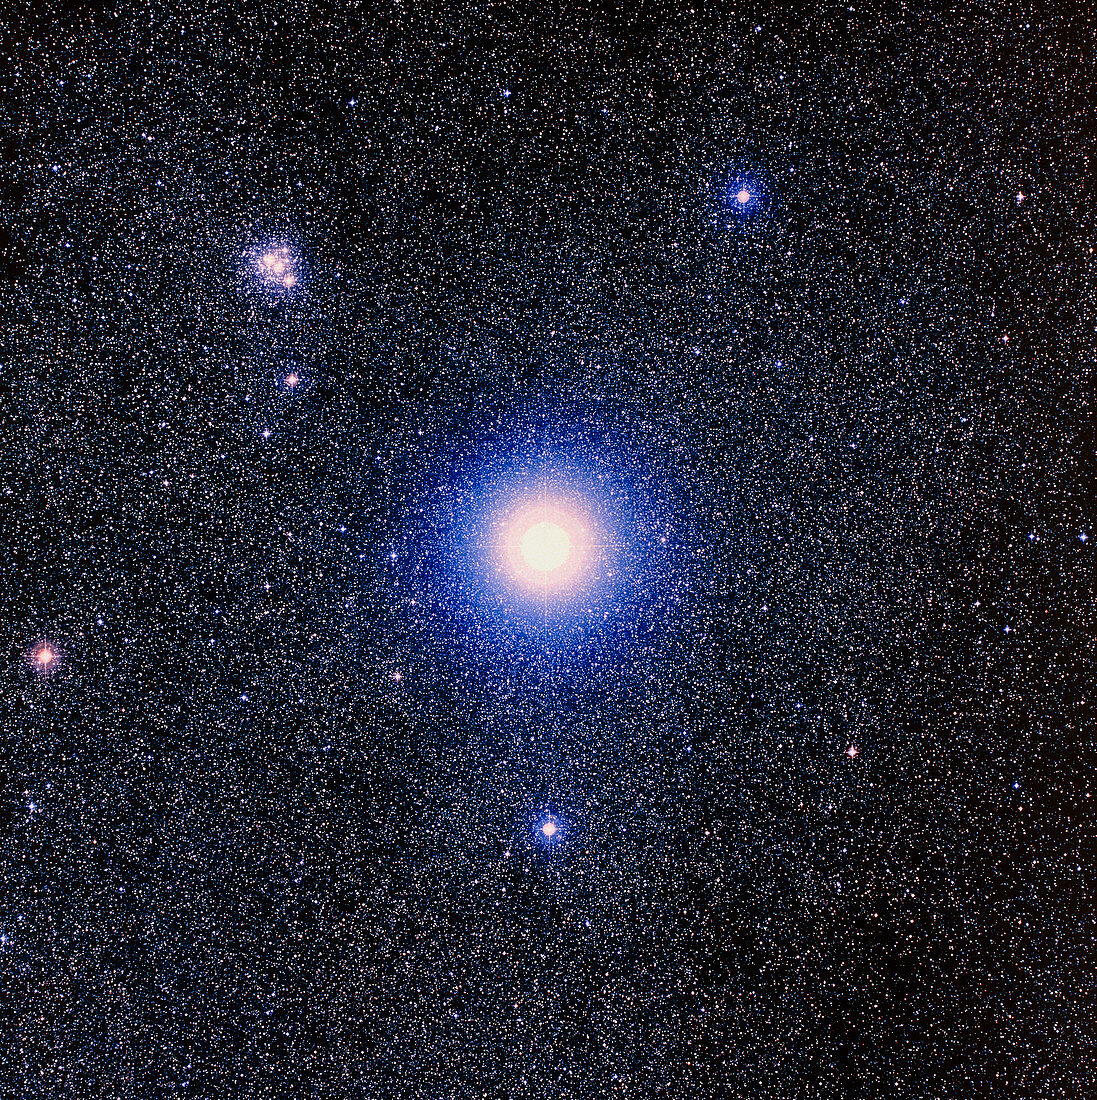 Optical image of the star Mimosa,or Beta Crucis